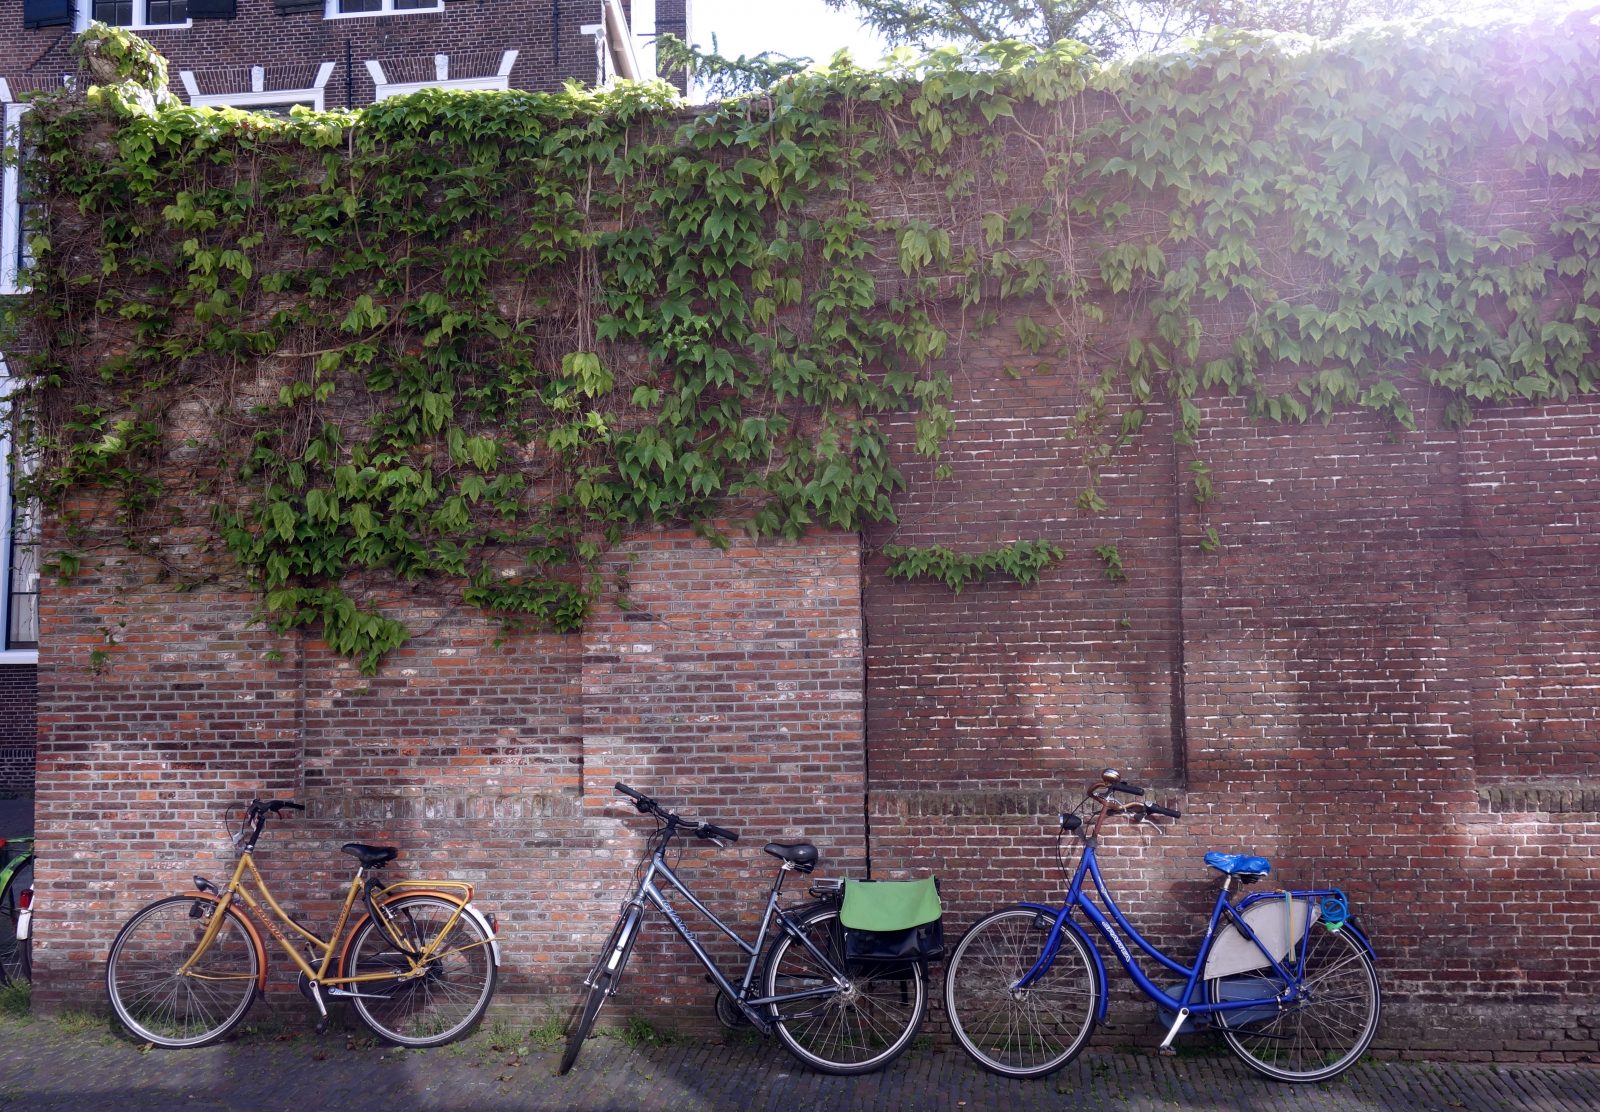 How to spend a slow, sustainable weekend in Leiden